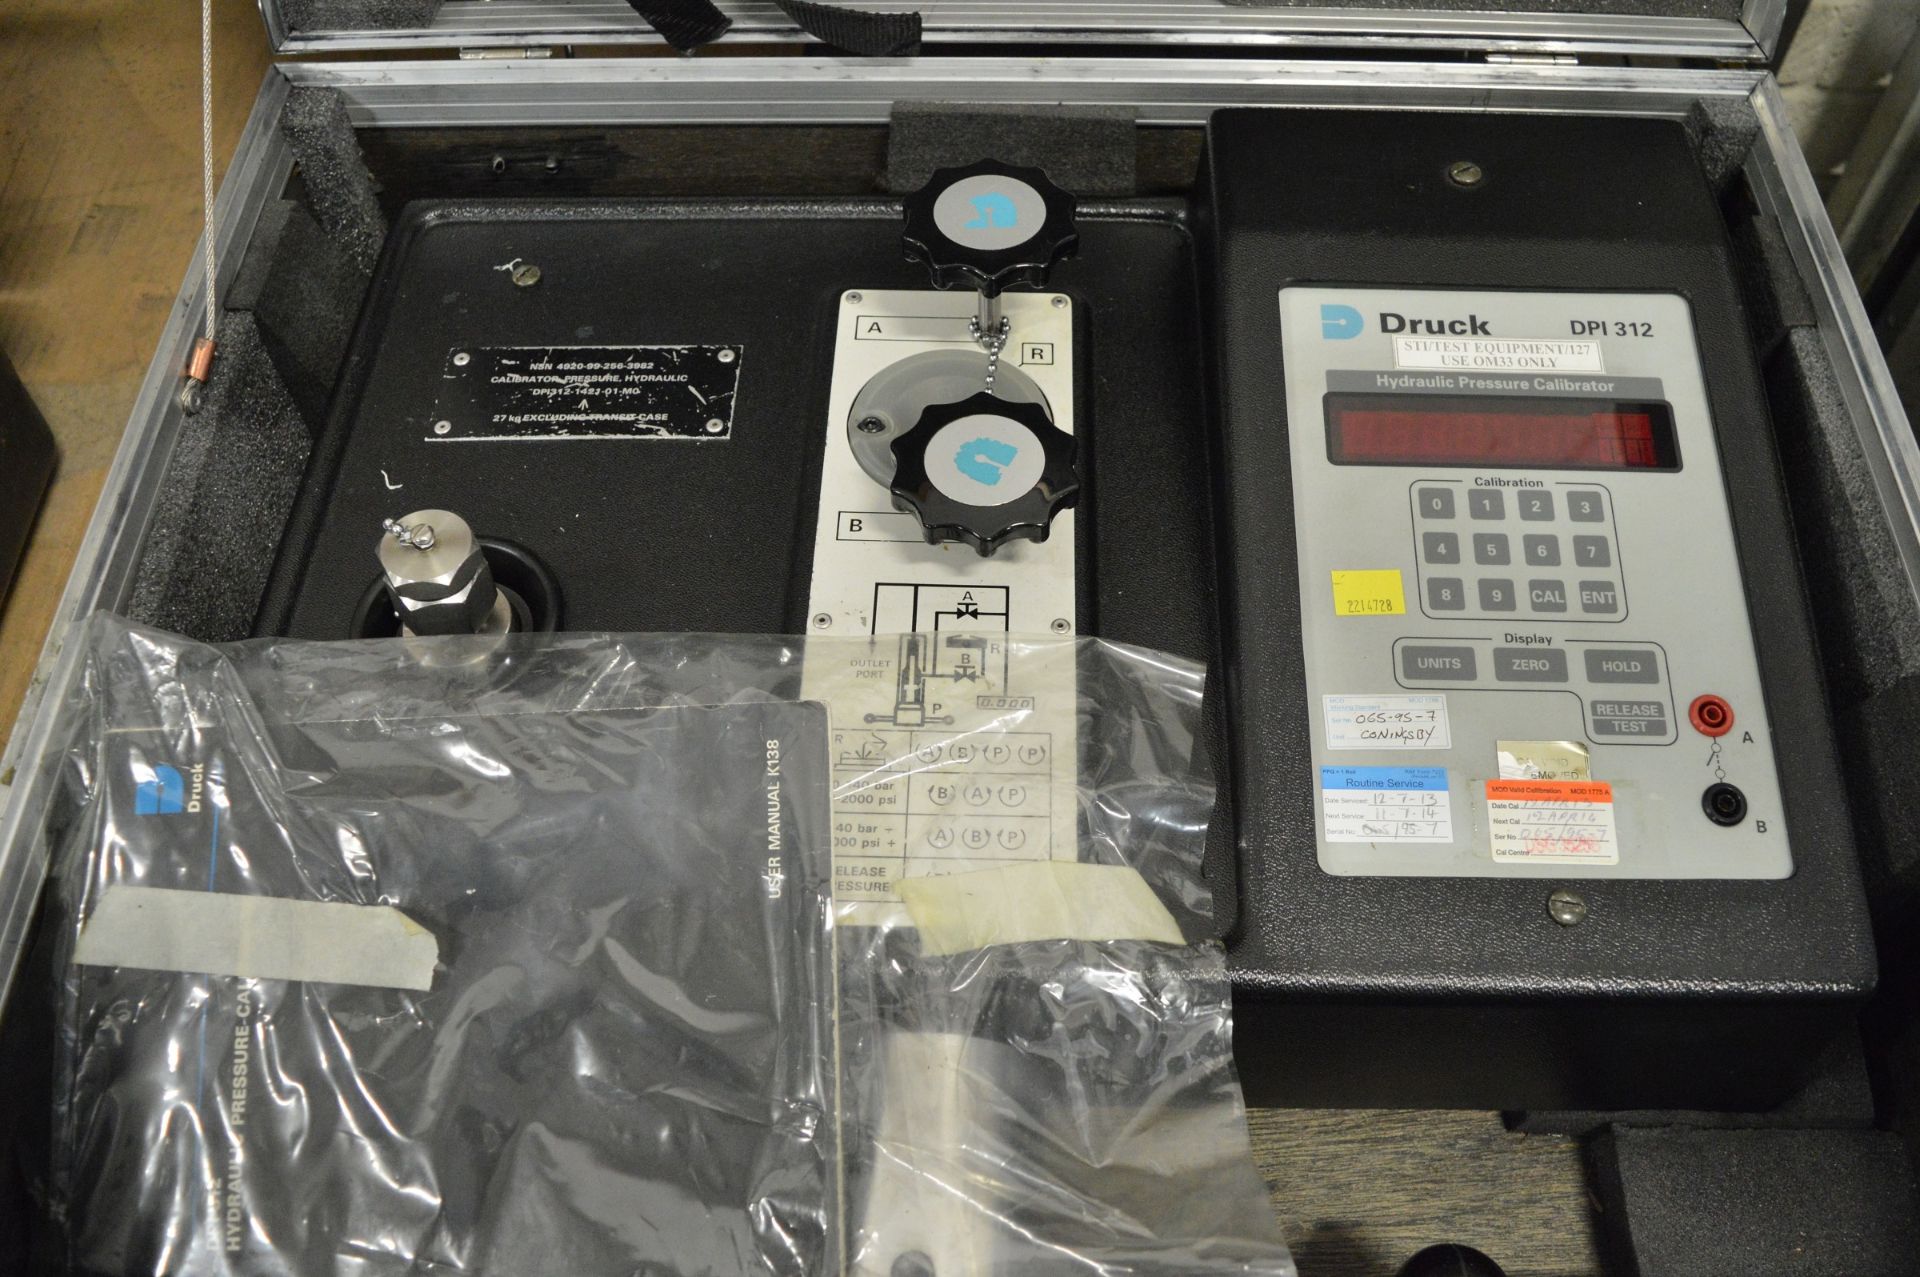 Druck DPI312 Hydraulic Pressure Calibrator & Case - over 40kg for courier - Image 2 of 4